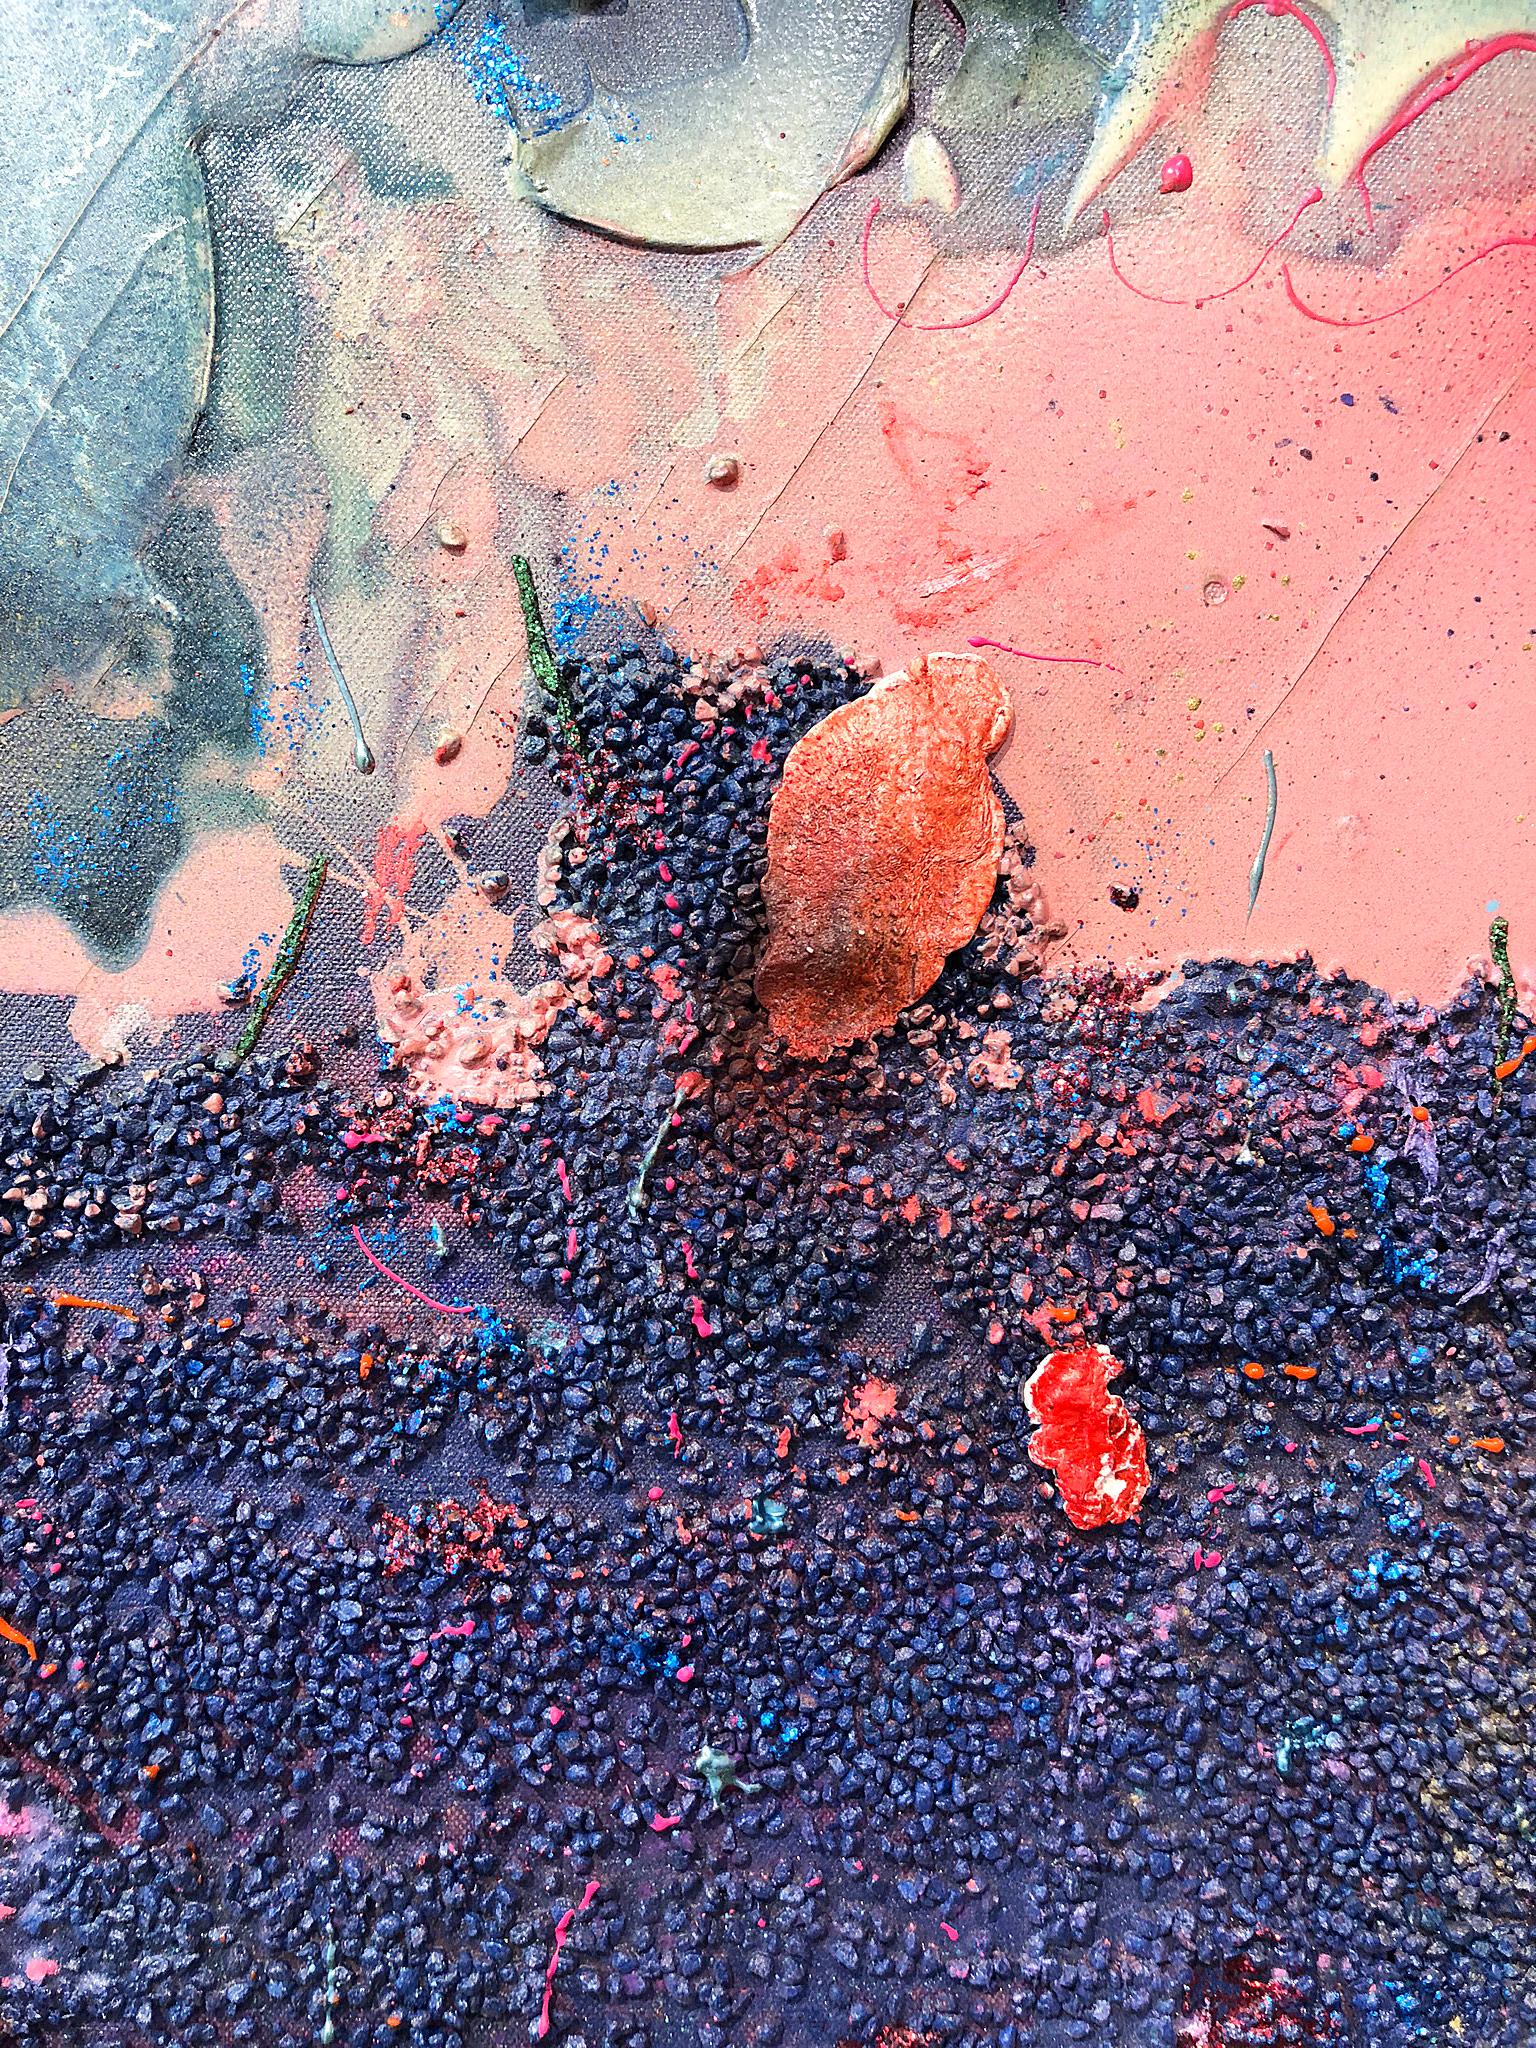 'Alcamorispettounquarried' by Stanley Boxer, 1990. Oil and mixed media on canvas, 40 x 50 in. / Frame: 41.5 x 51.25 in. This mixed media work has an active surface that is thickly painted with defined brush strokes in a color palette of pink, deep